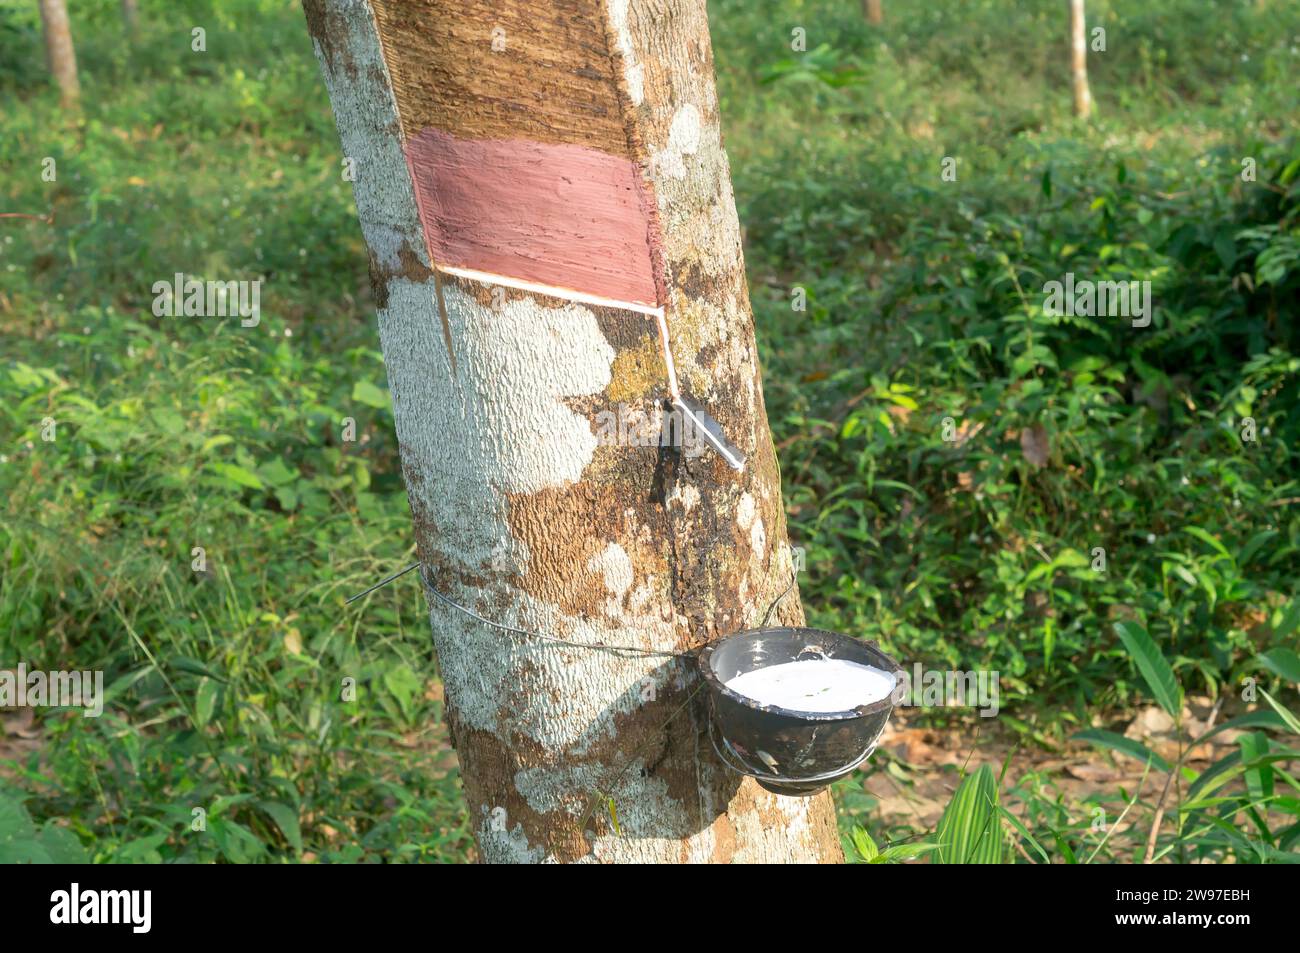 Rubber tree is providing great yield of natural rubber latex tapped or extracted from rubber tree in rubber plantation in south of Thailand. Stock Photo